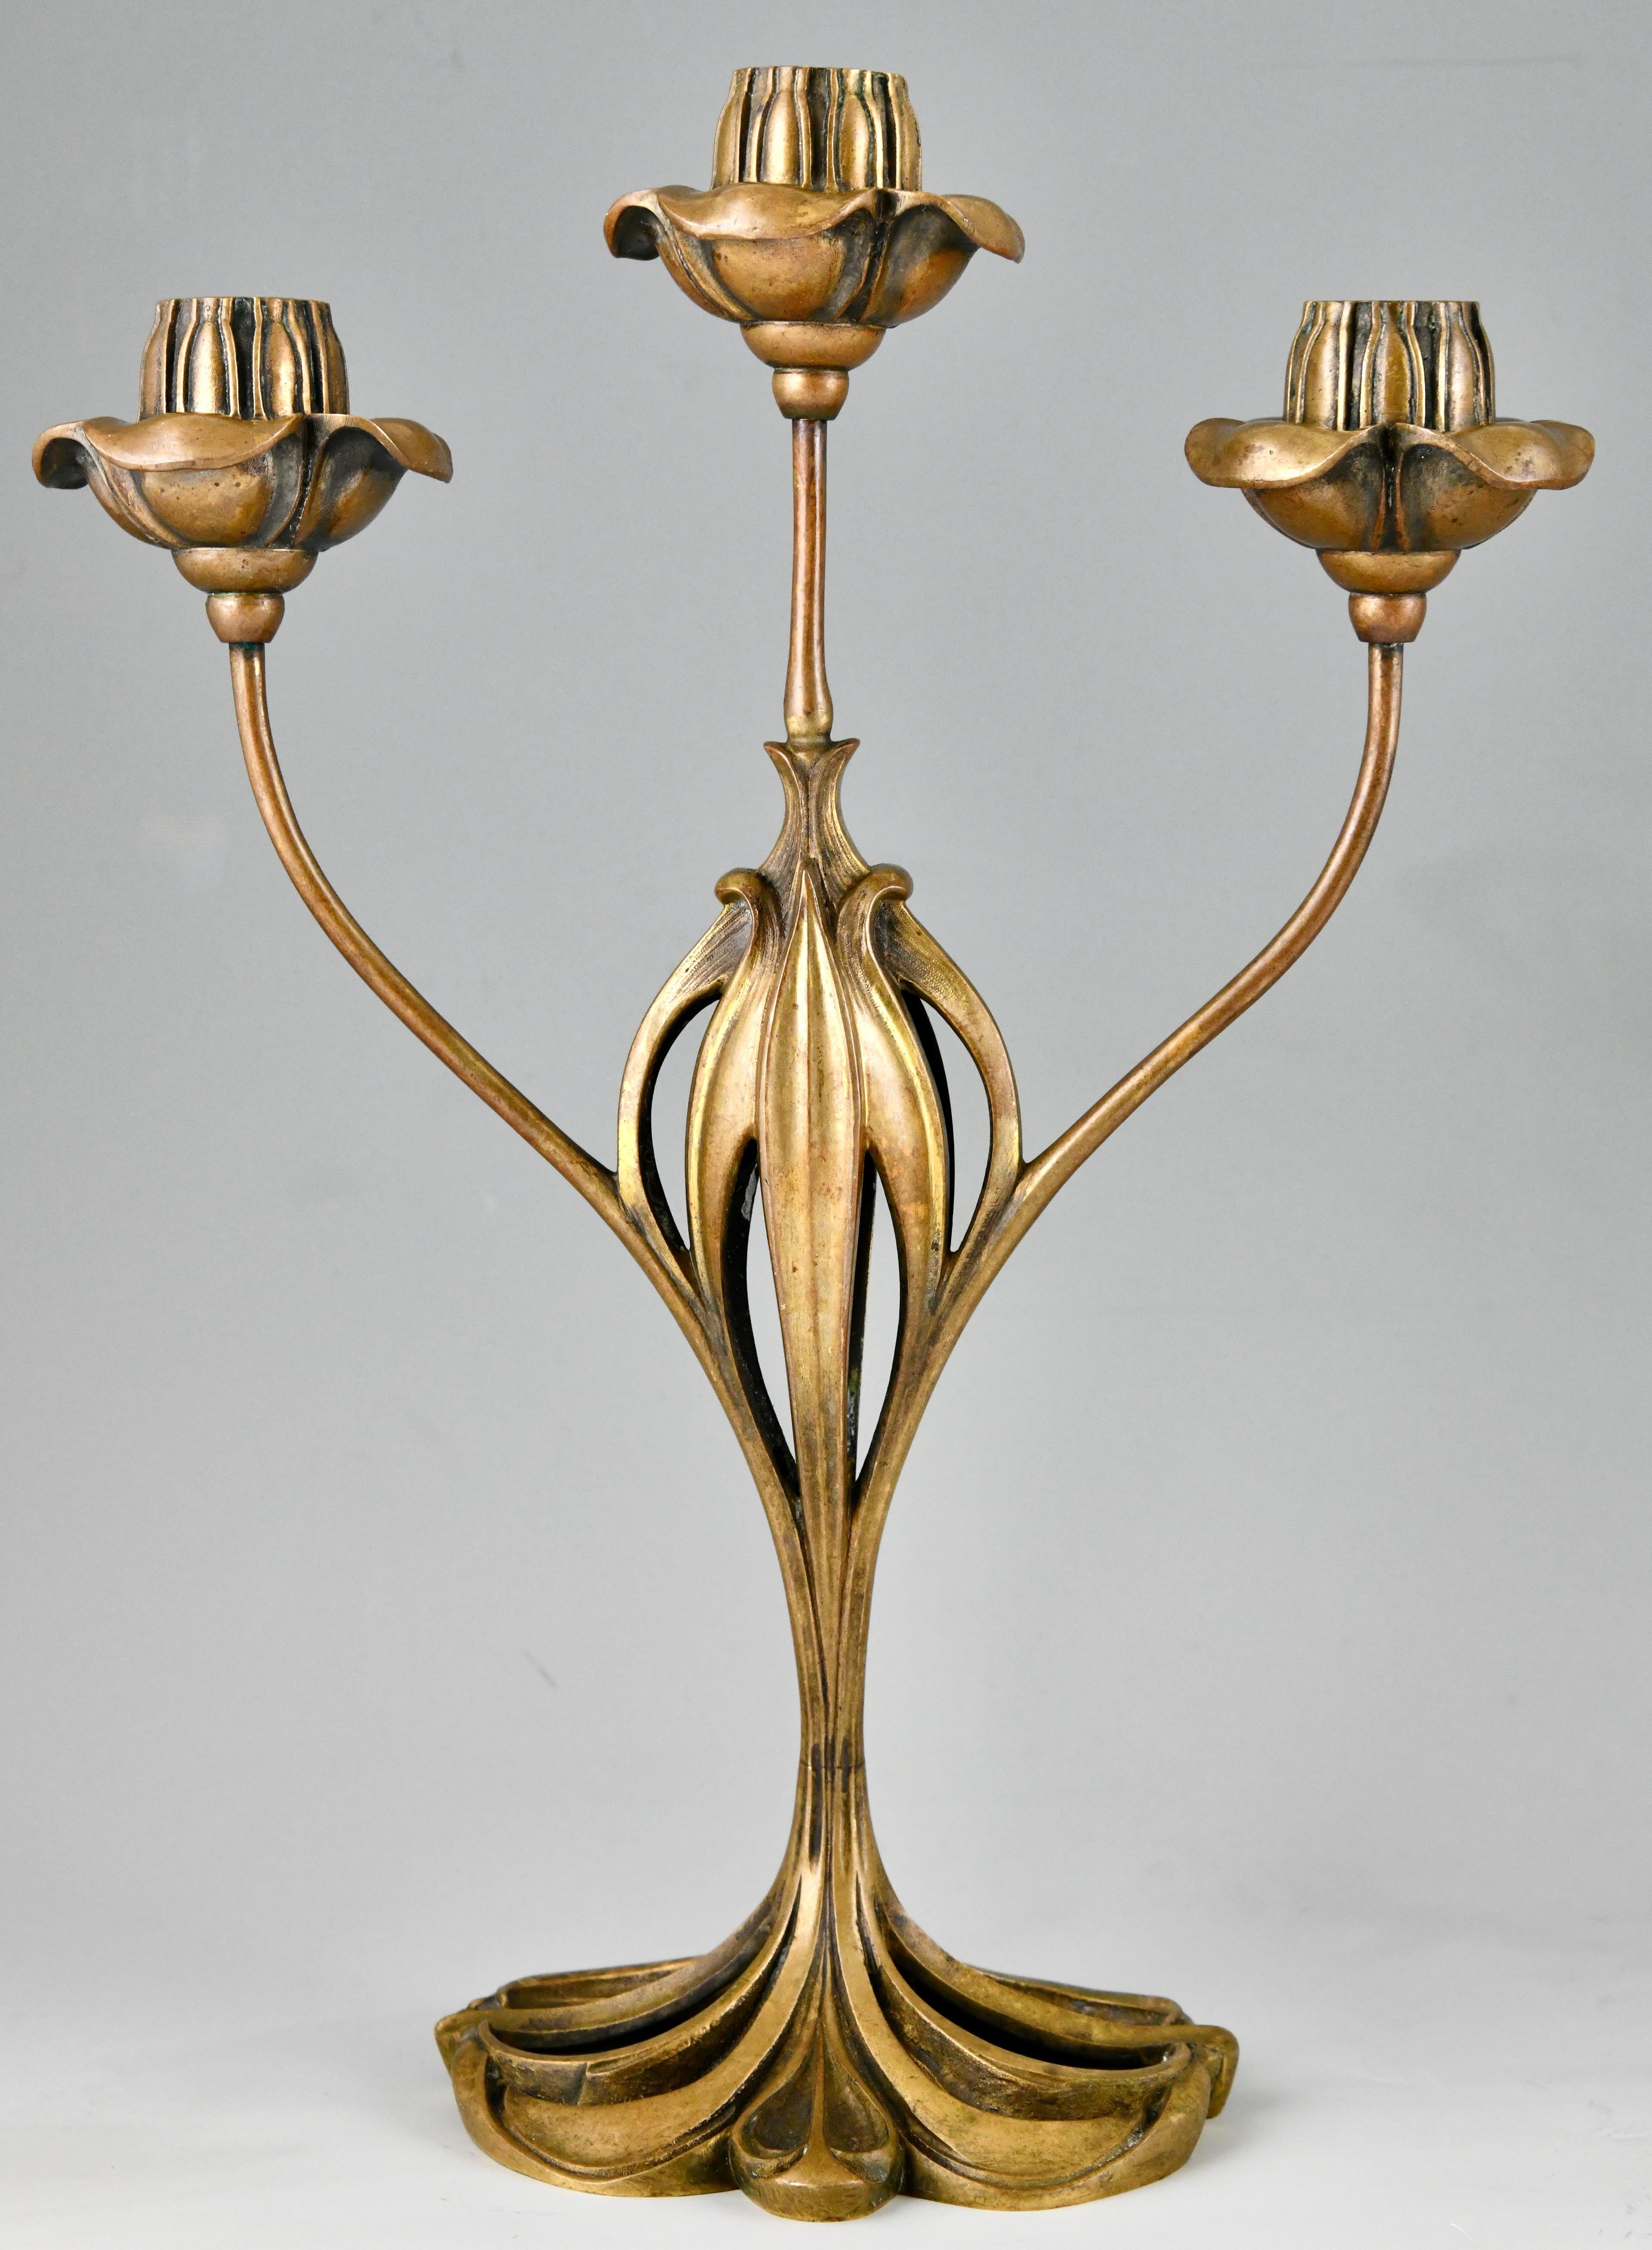 Early 20th Century Pair of bronze Art Nouveau candelabra with floral design by Georges de Feure